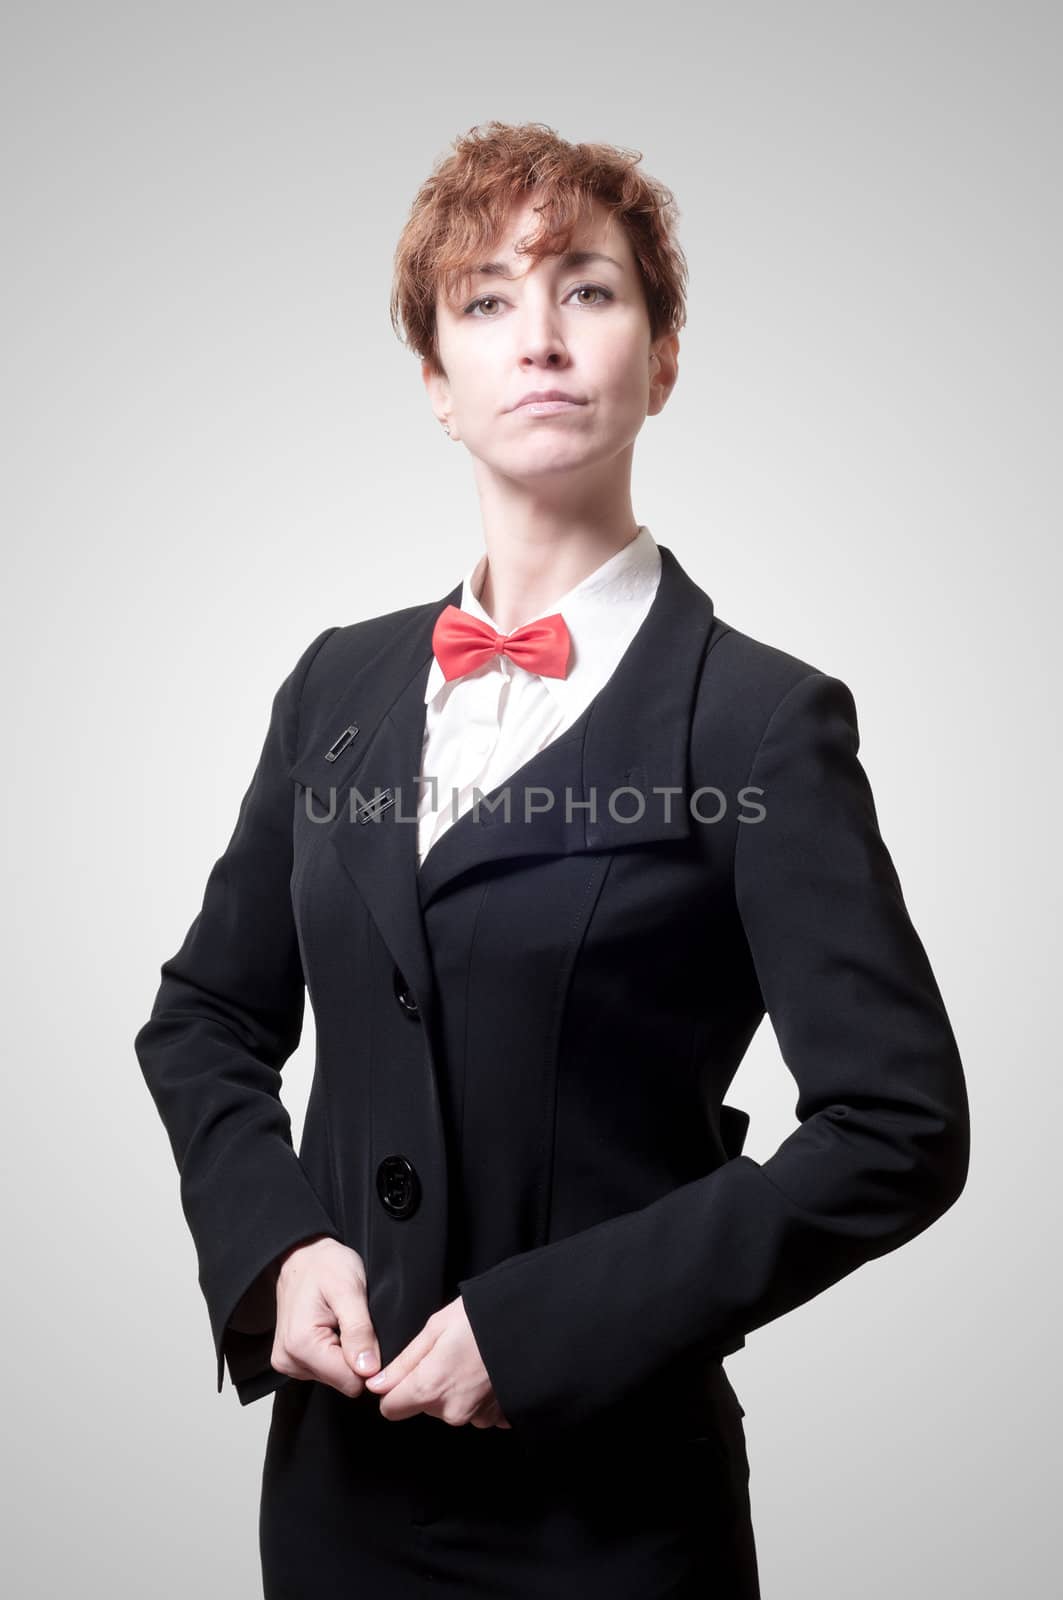 elegant businesswoman with bow tie on gray background